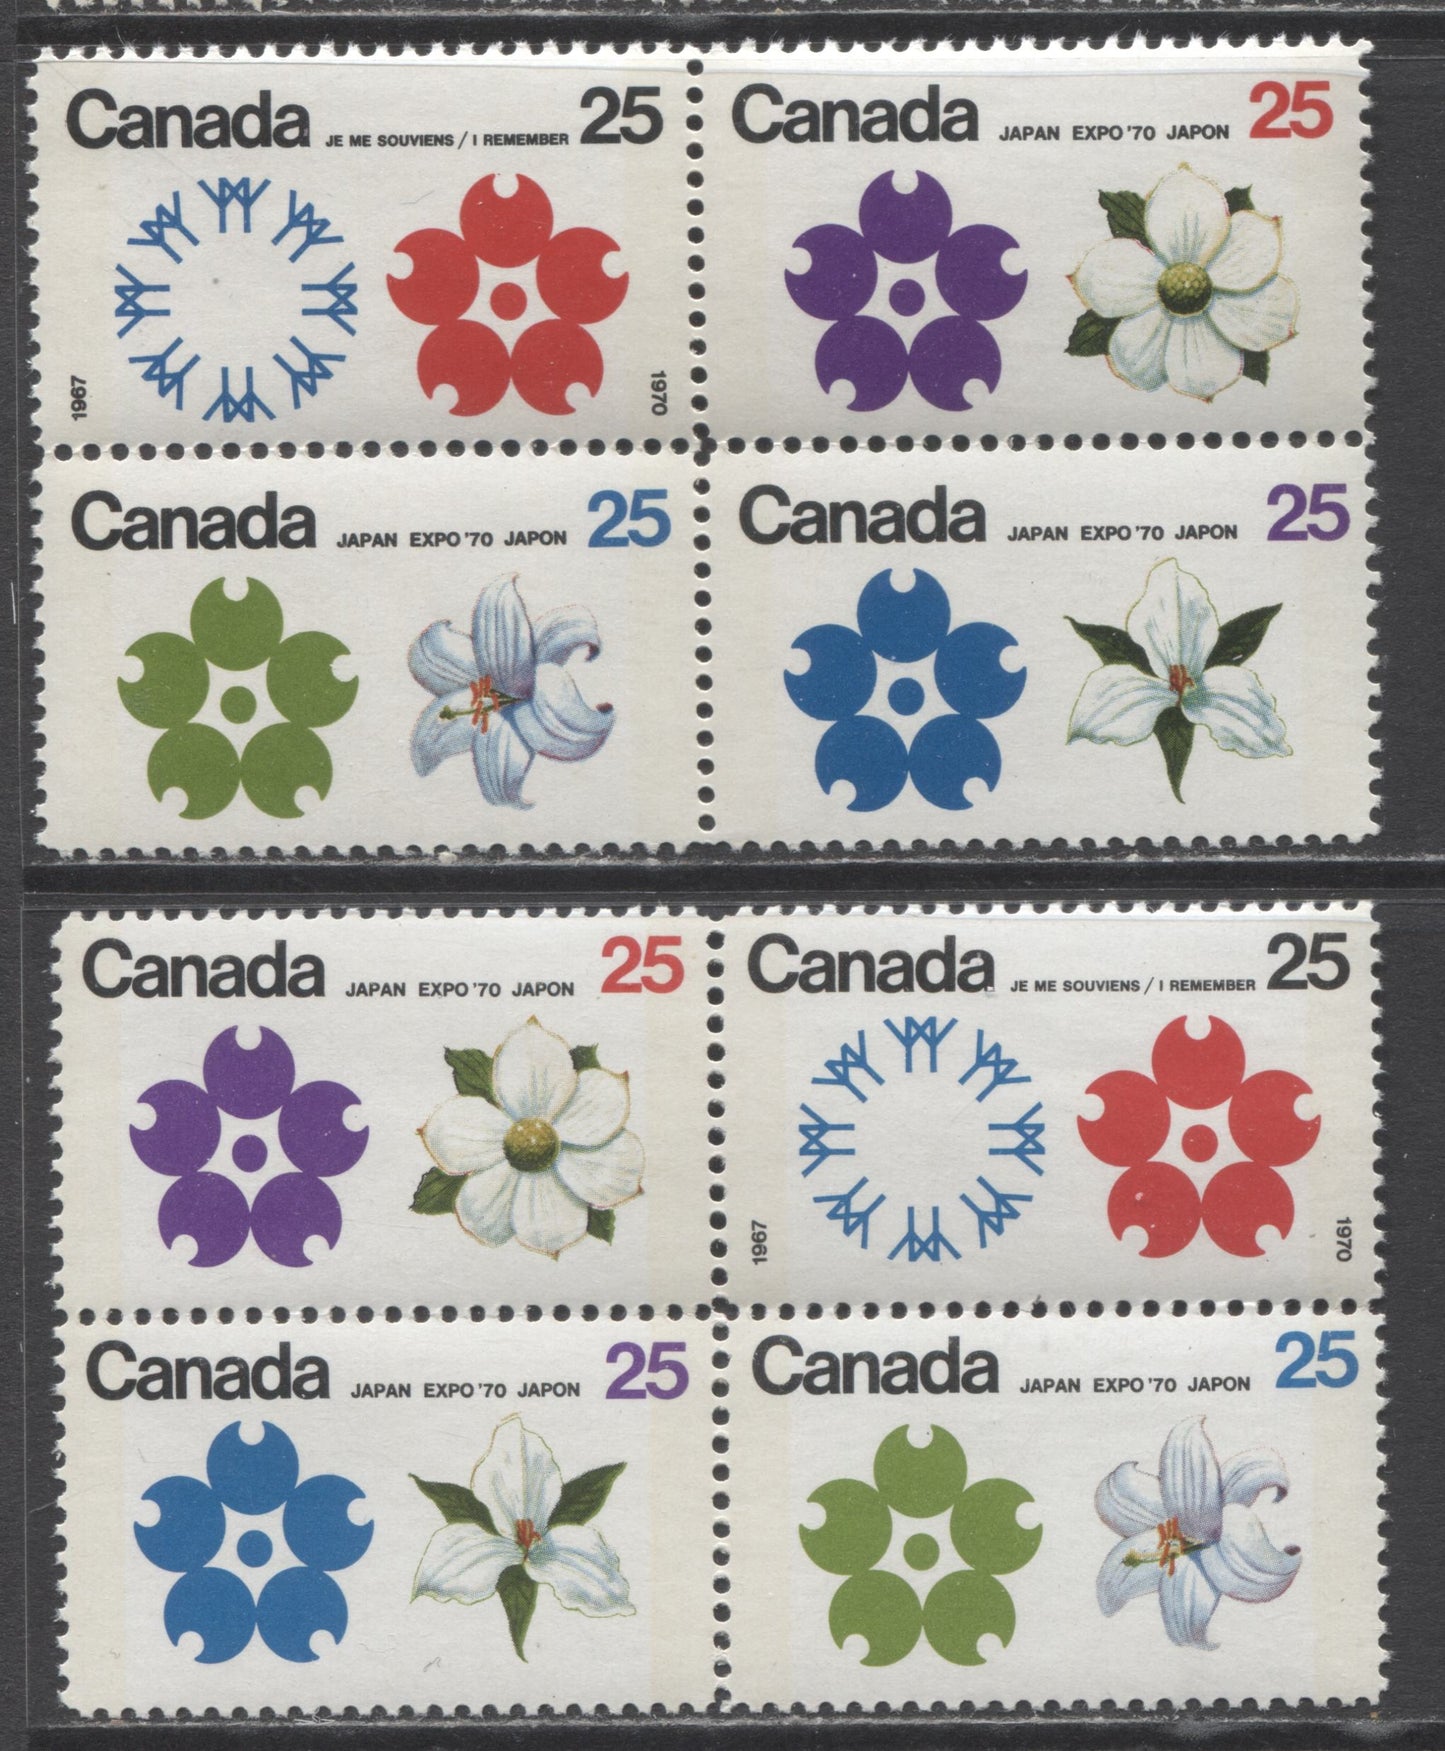 Lot 404 Canada #511a-b 25c Multicolored Flowers & Emblems, 1970 Expo Issue, 2 VFNH Tagged & Untagged Se-Tenant Blocks Of 4 Slight Gum Disturbance On 1 Stamp Of Untagged Block